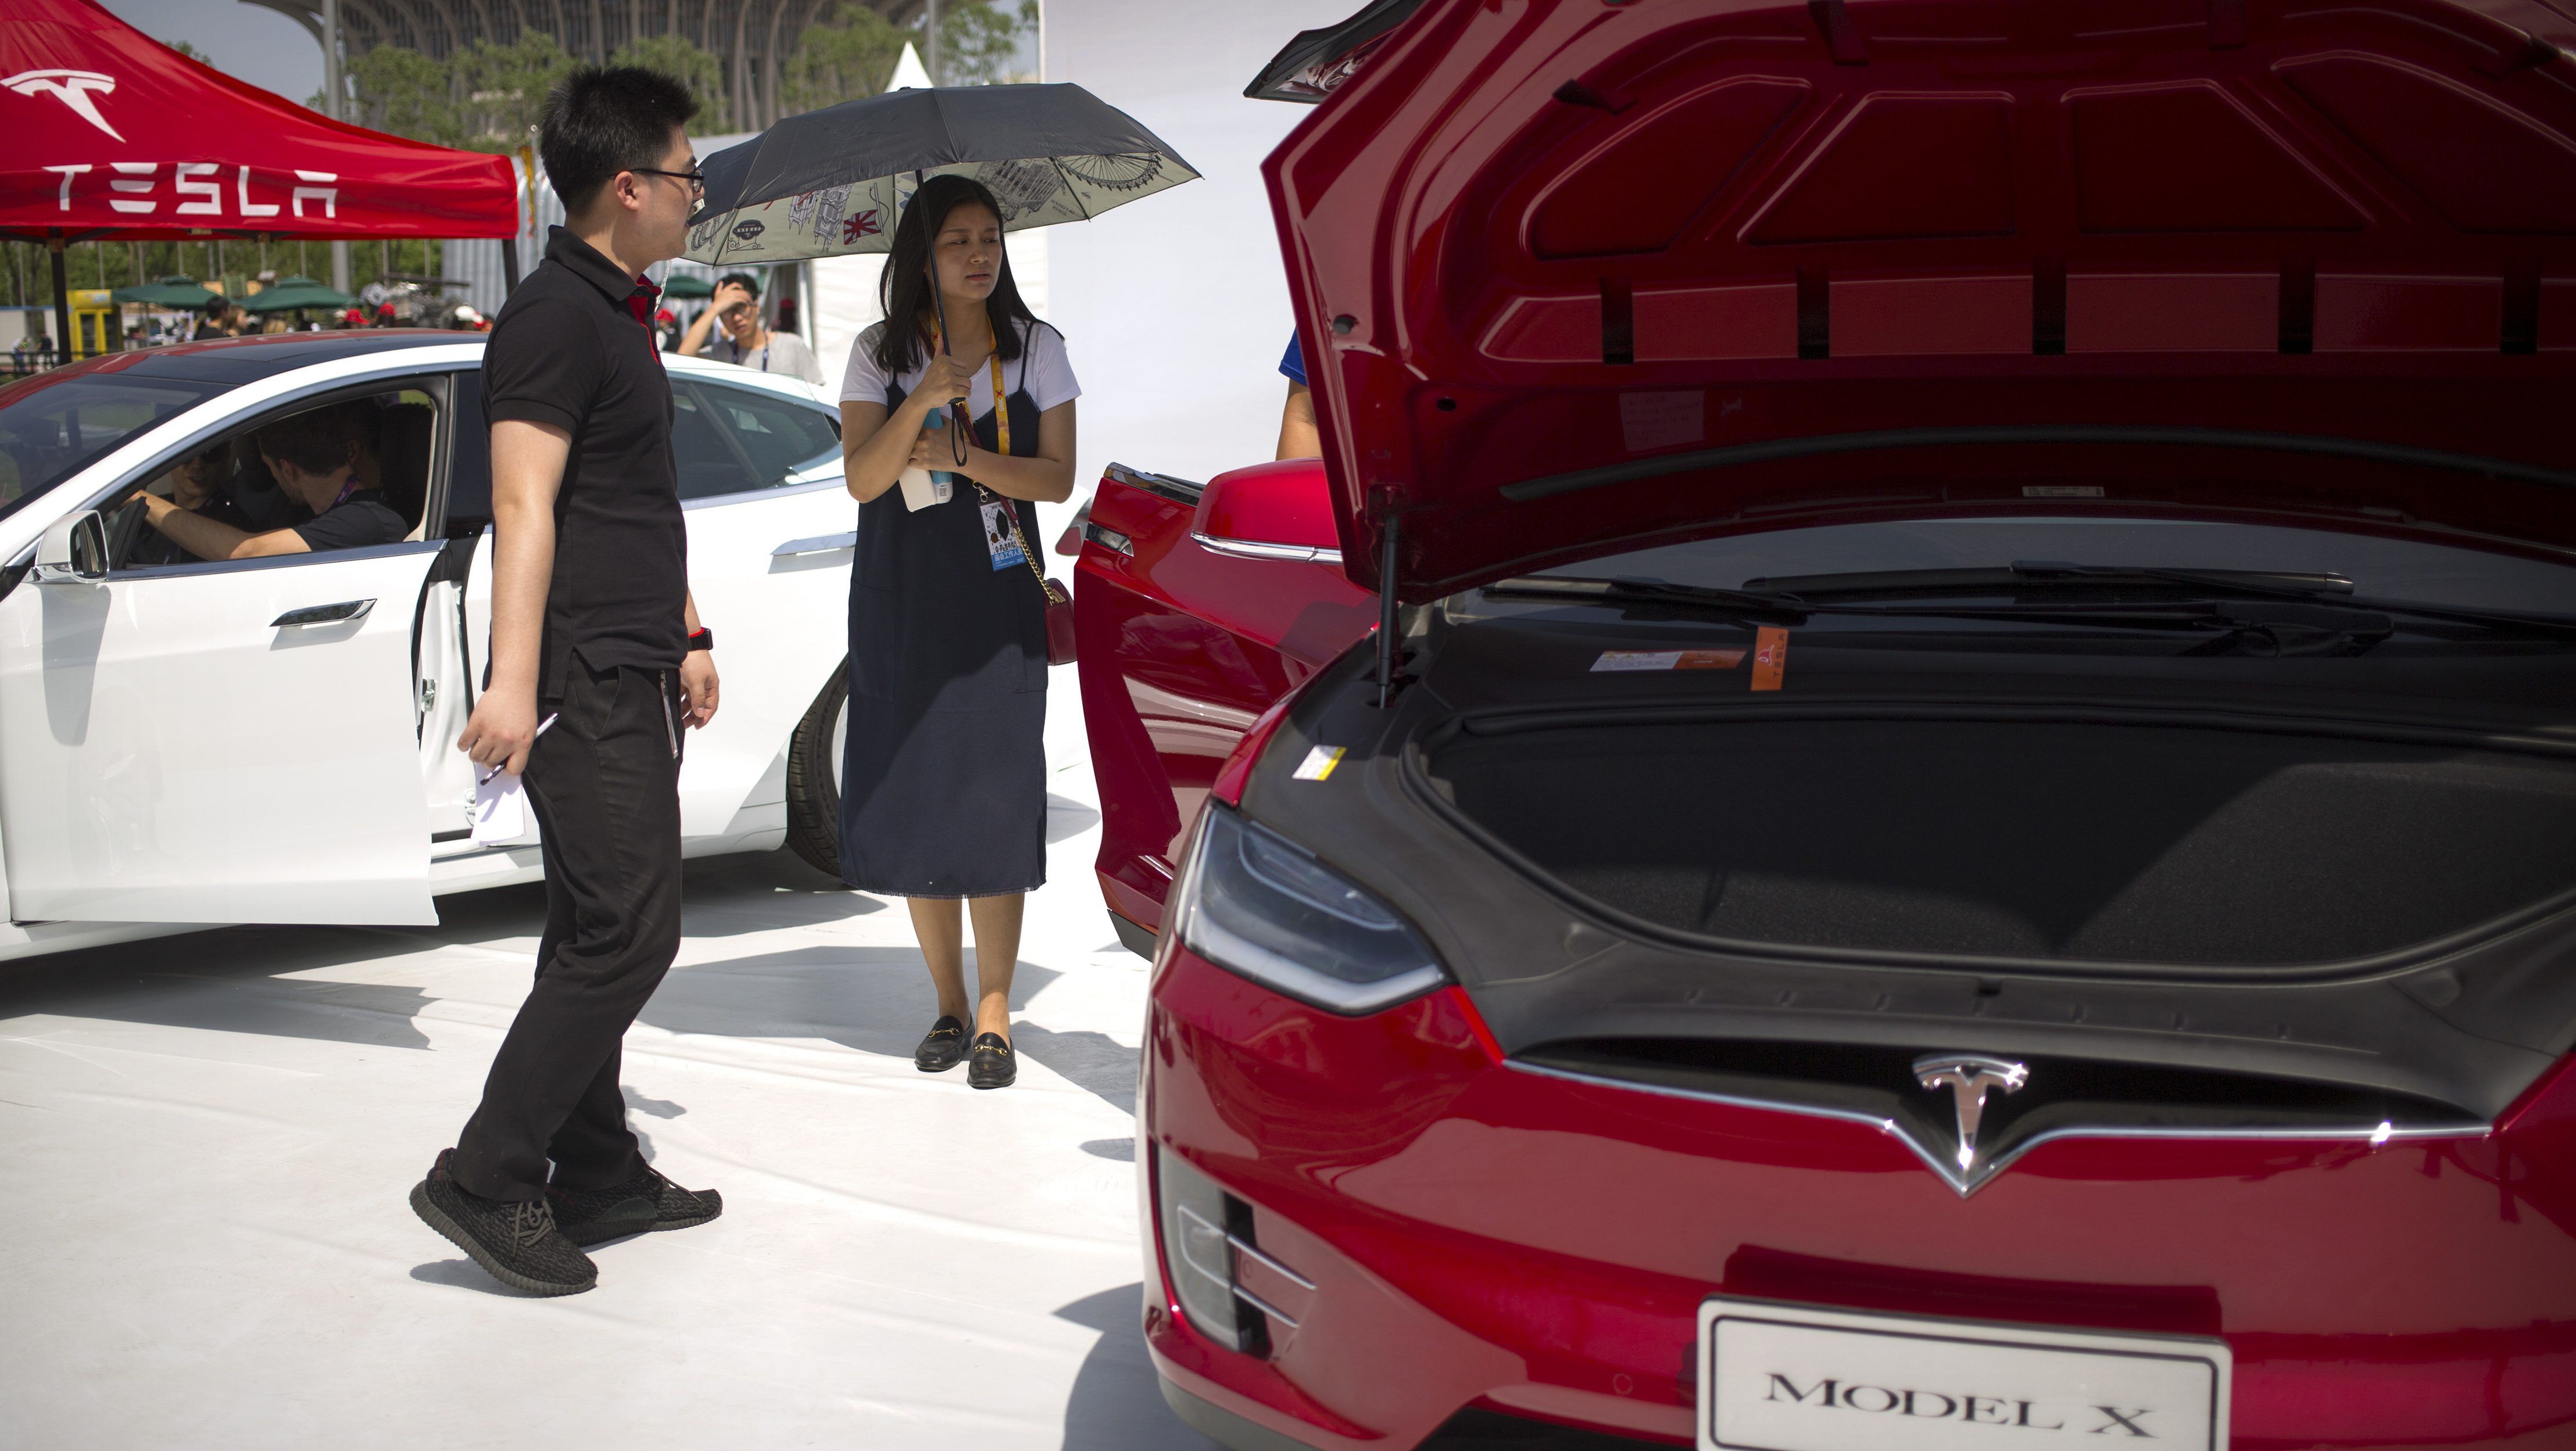 A visitor holds an umbrella as she looks at a Tesla Model X car on display at the G Festival, part of the Global Mobile Internet Conference (GMIC) in Beijing, Saturday, April 29, 2017. (AP Photo/Mark Schiefelbein)